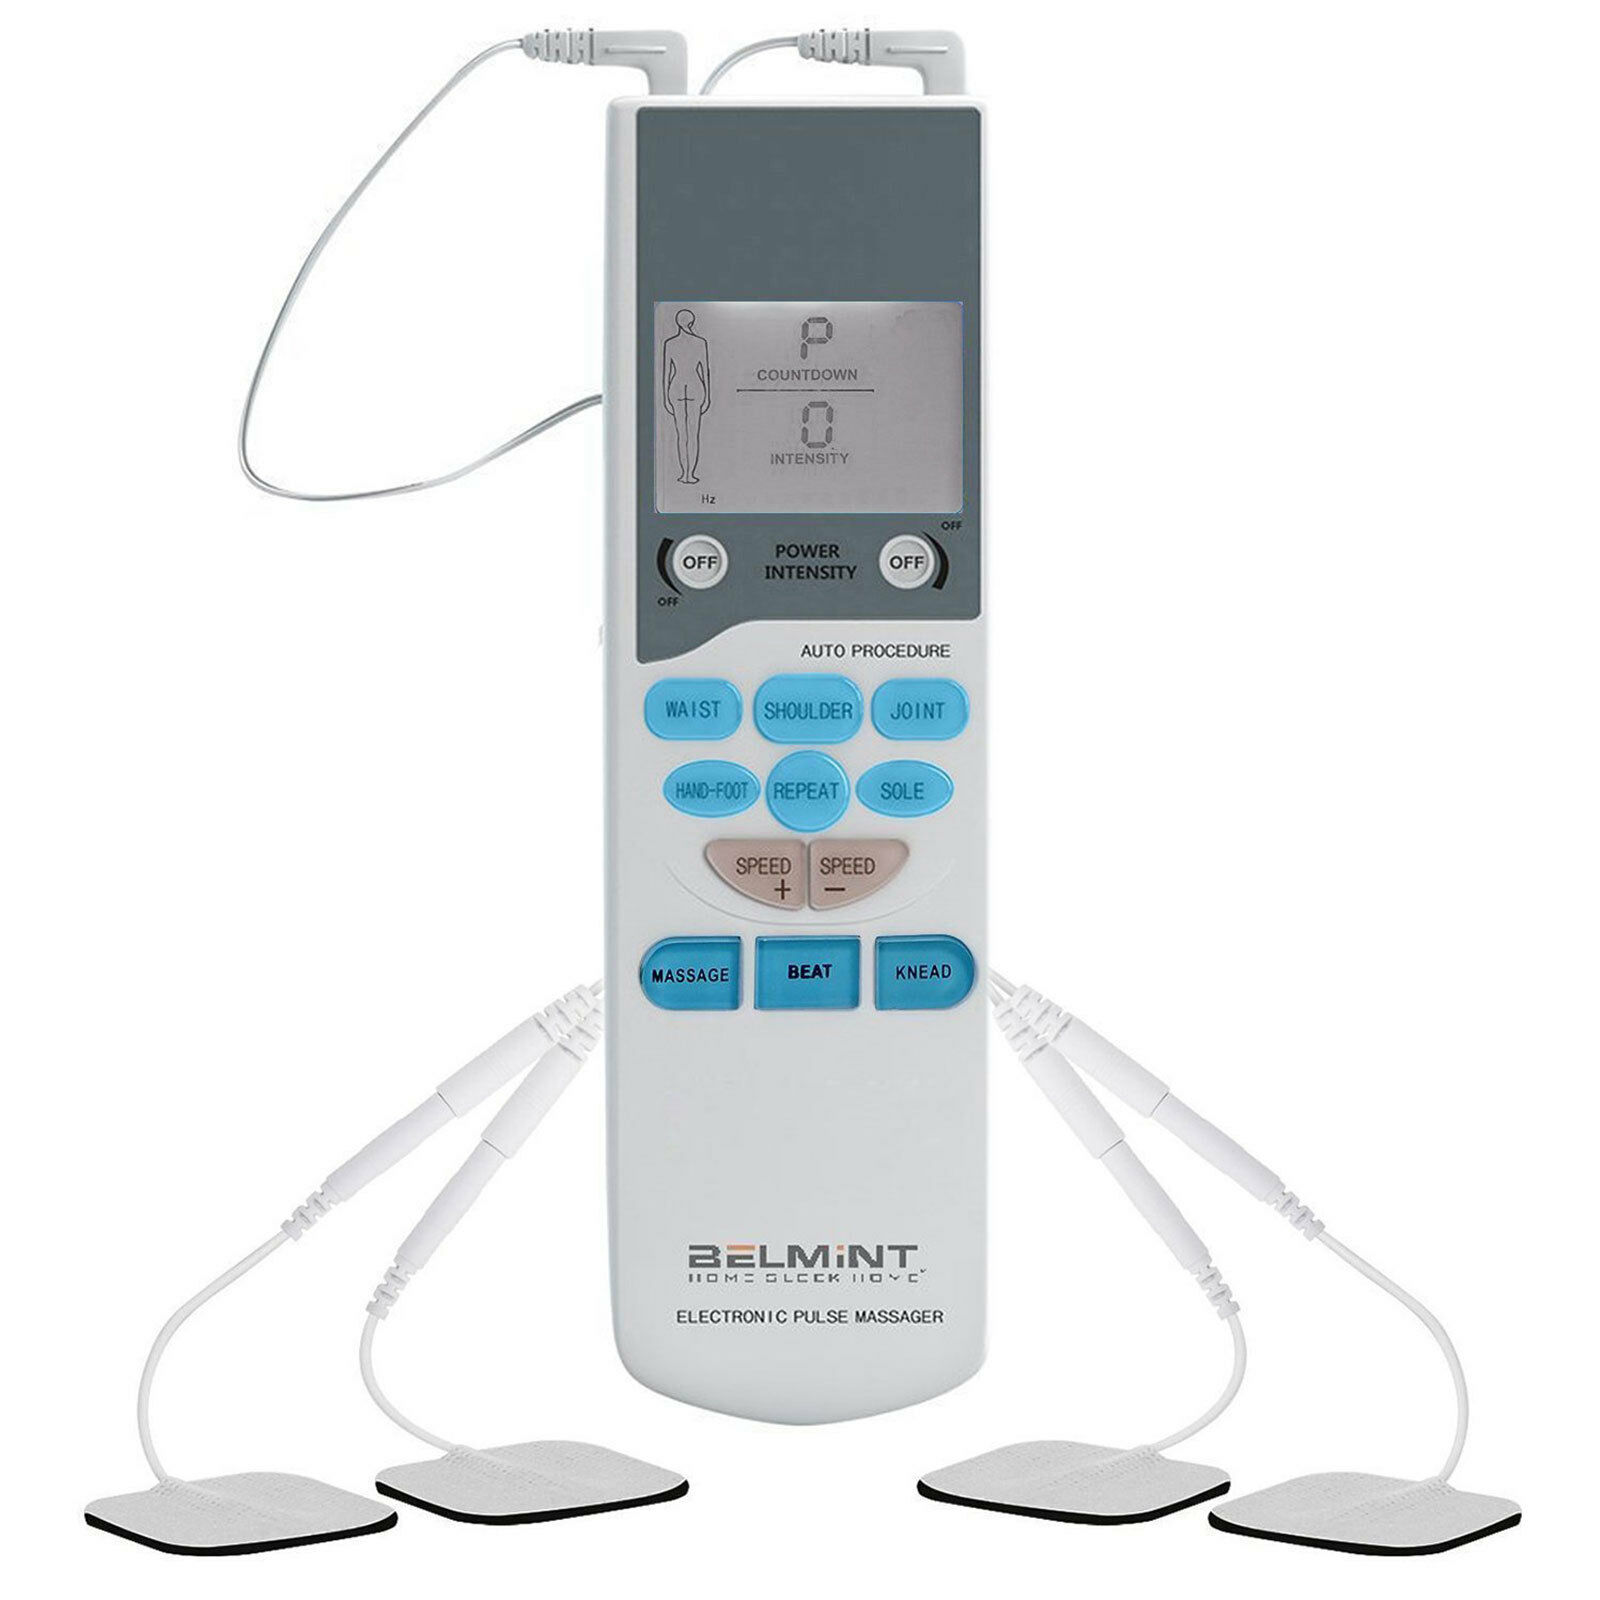 Tens Unit Electronic Pulse Massager, Muscle Stimulator For Therapy Pain Relief